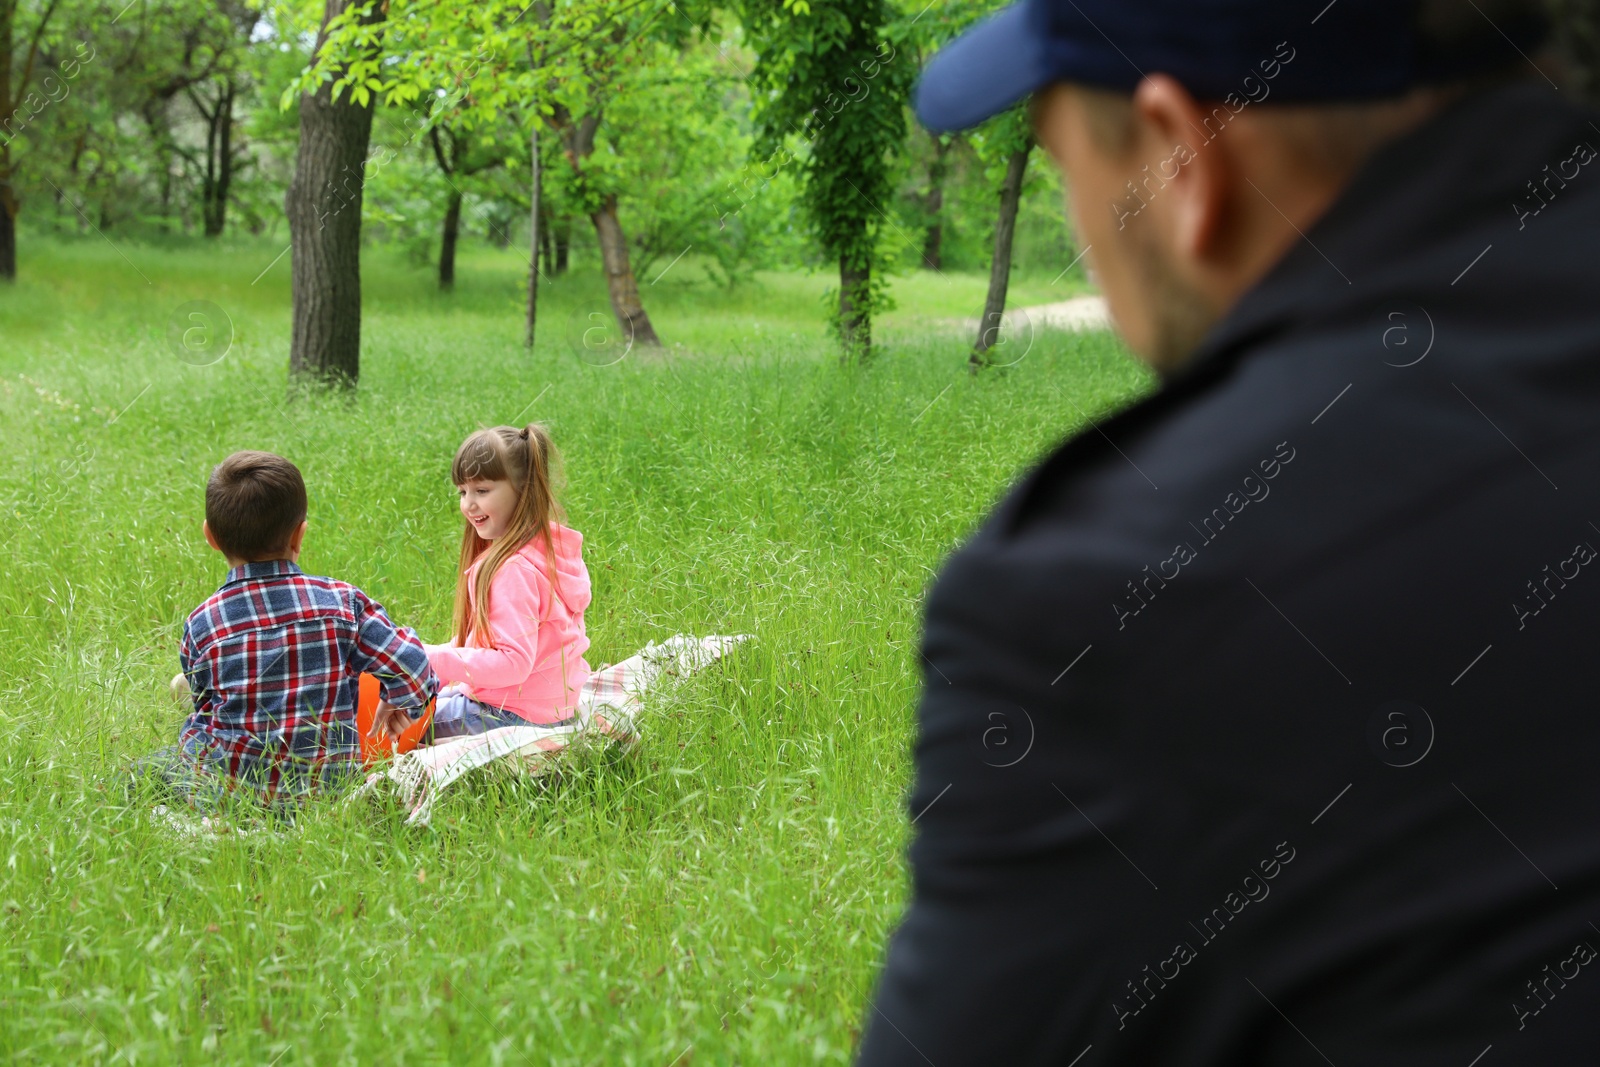 Photo of Suspicious adult man spying on kids at park. Child in danger